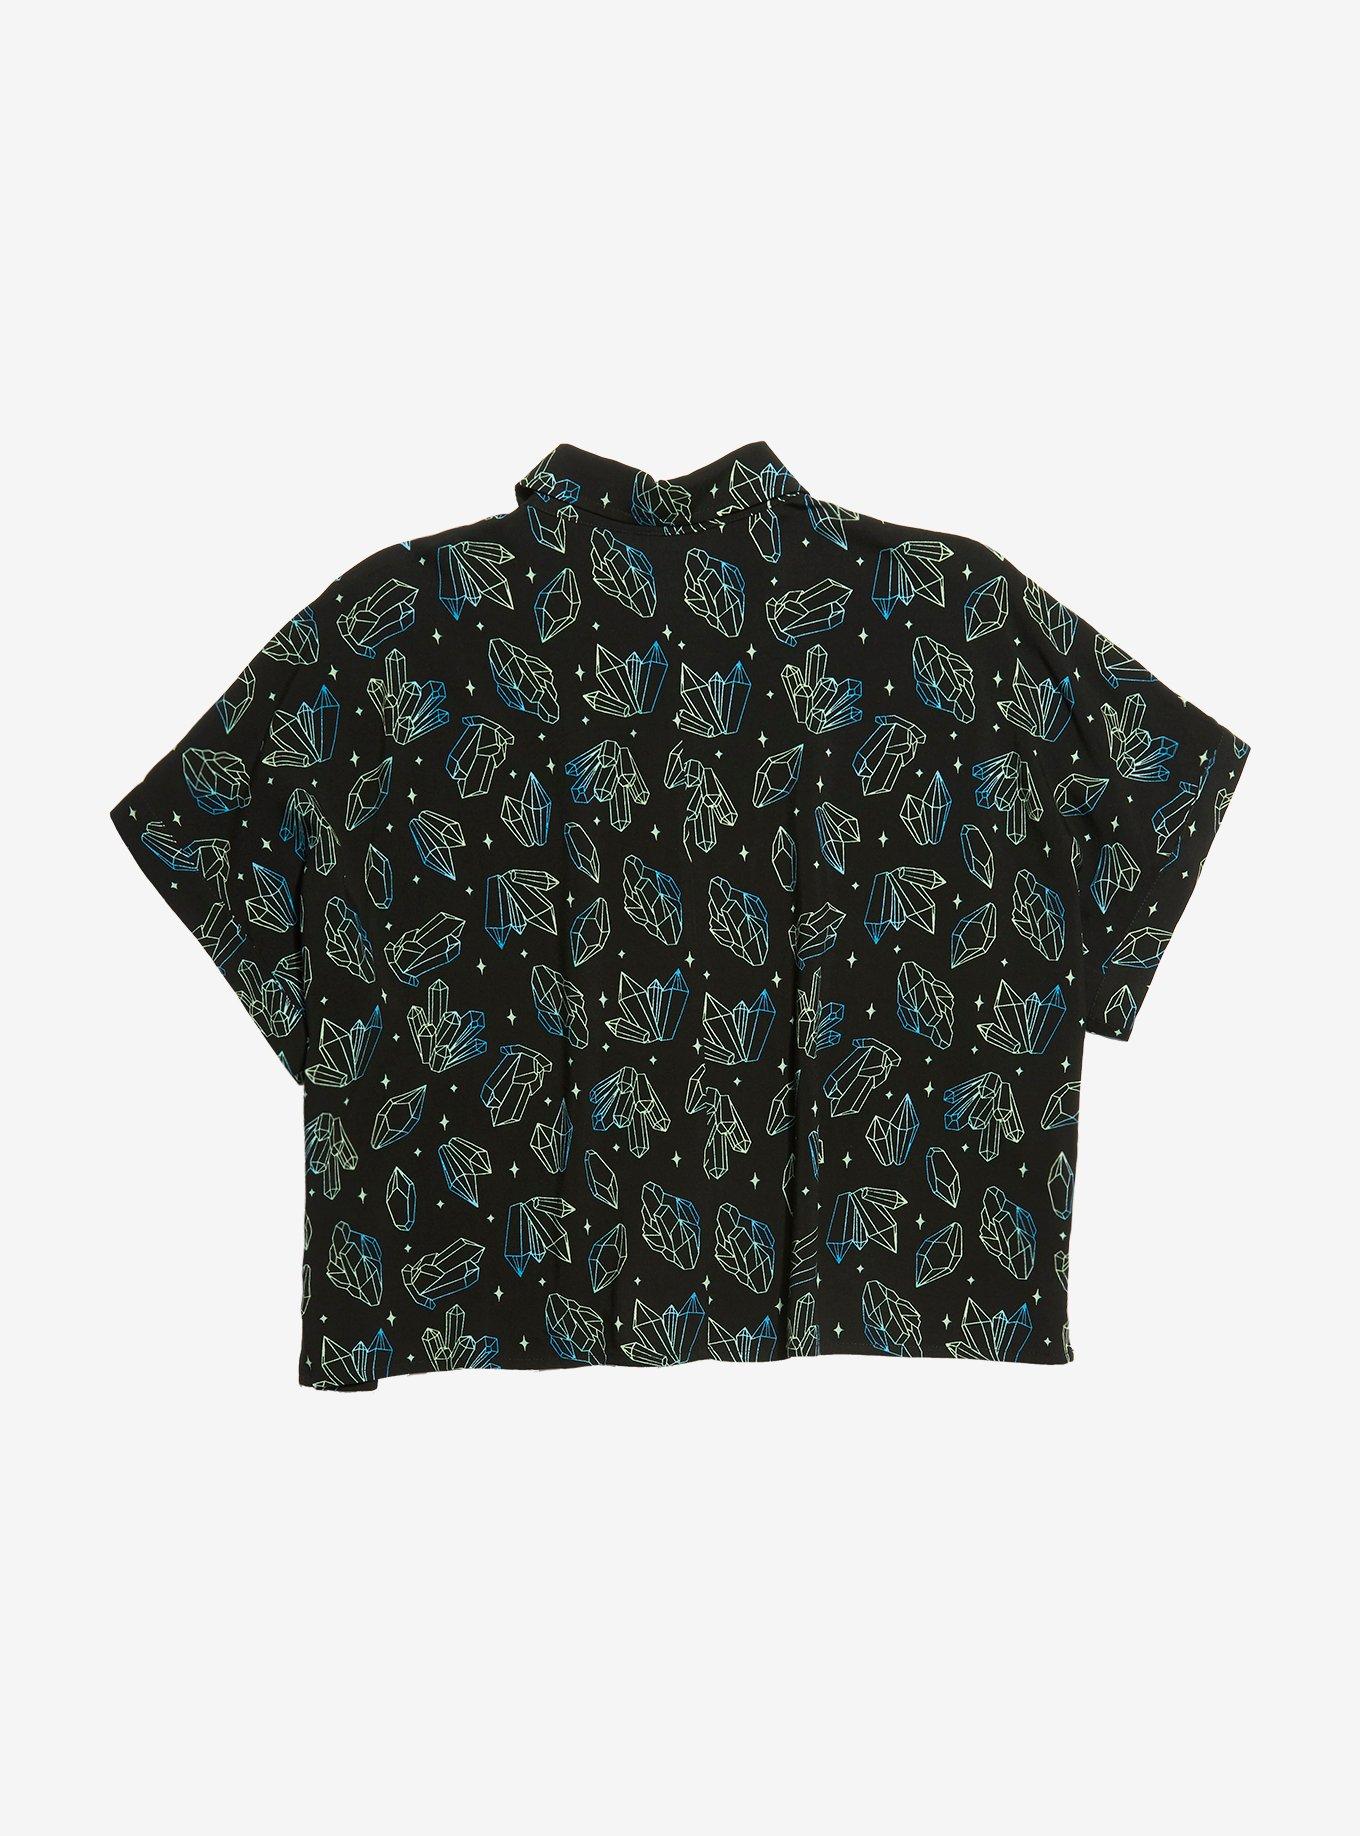 Teal Crystals Girls Woven Button-Up, TEAL, alternate